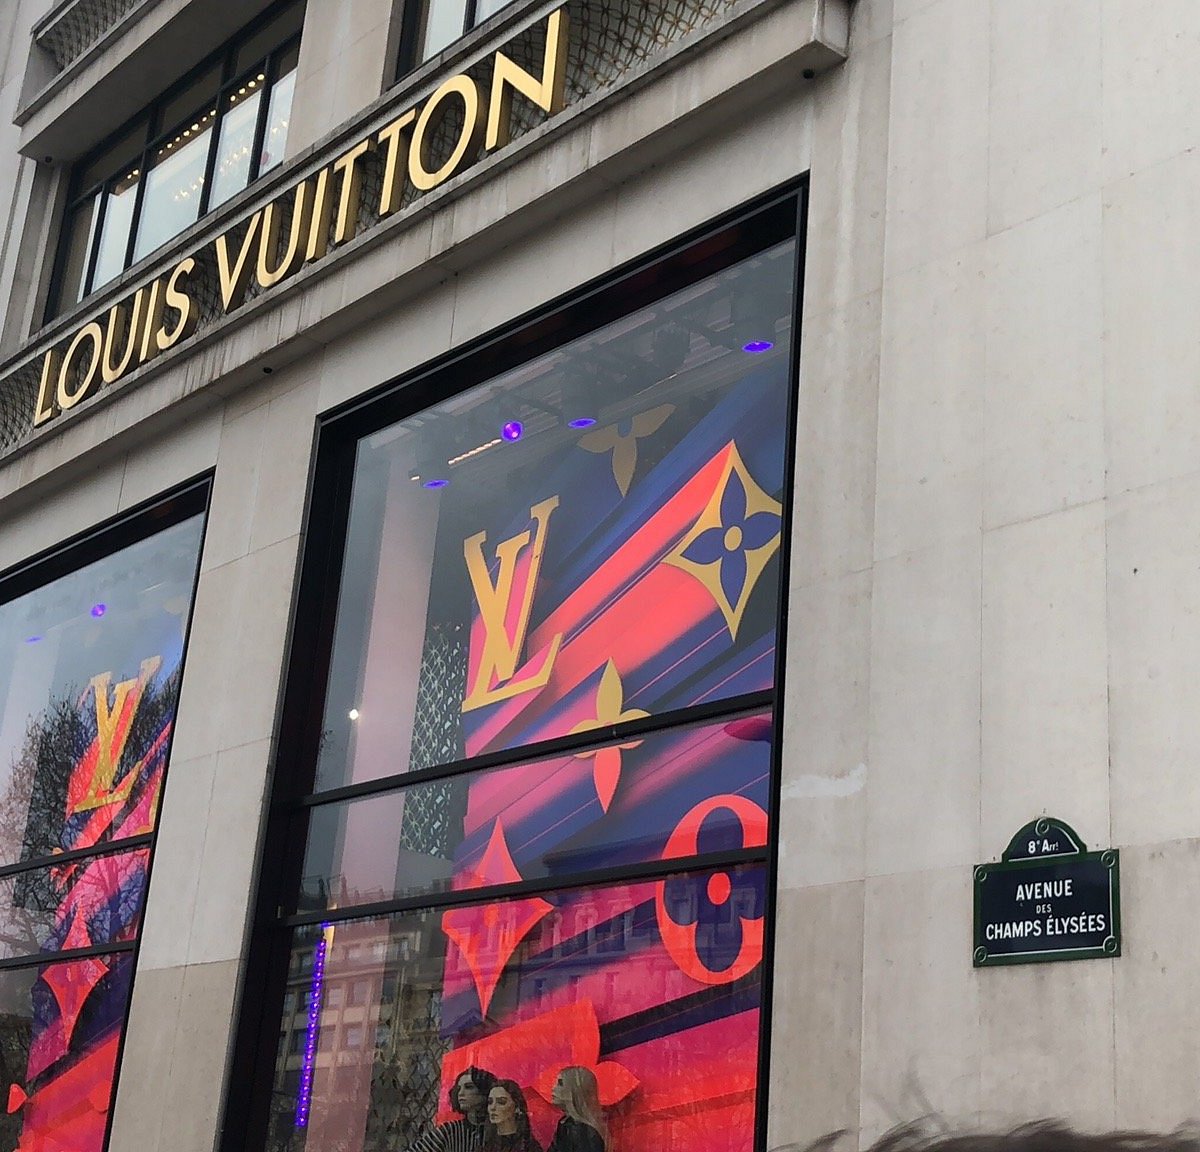 Get ready for Louis Vuitton's first-ever luxury hotel: the Paris property  will also house the fashion brand's largest store in the world, with views  of the Eiffel Tower and Notre Dame de